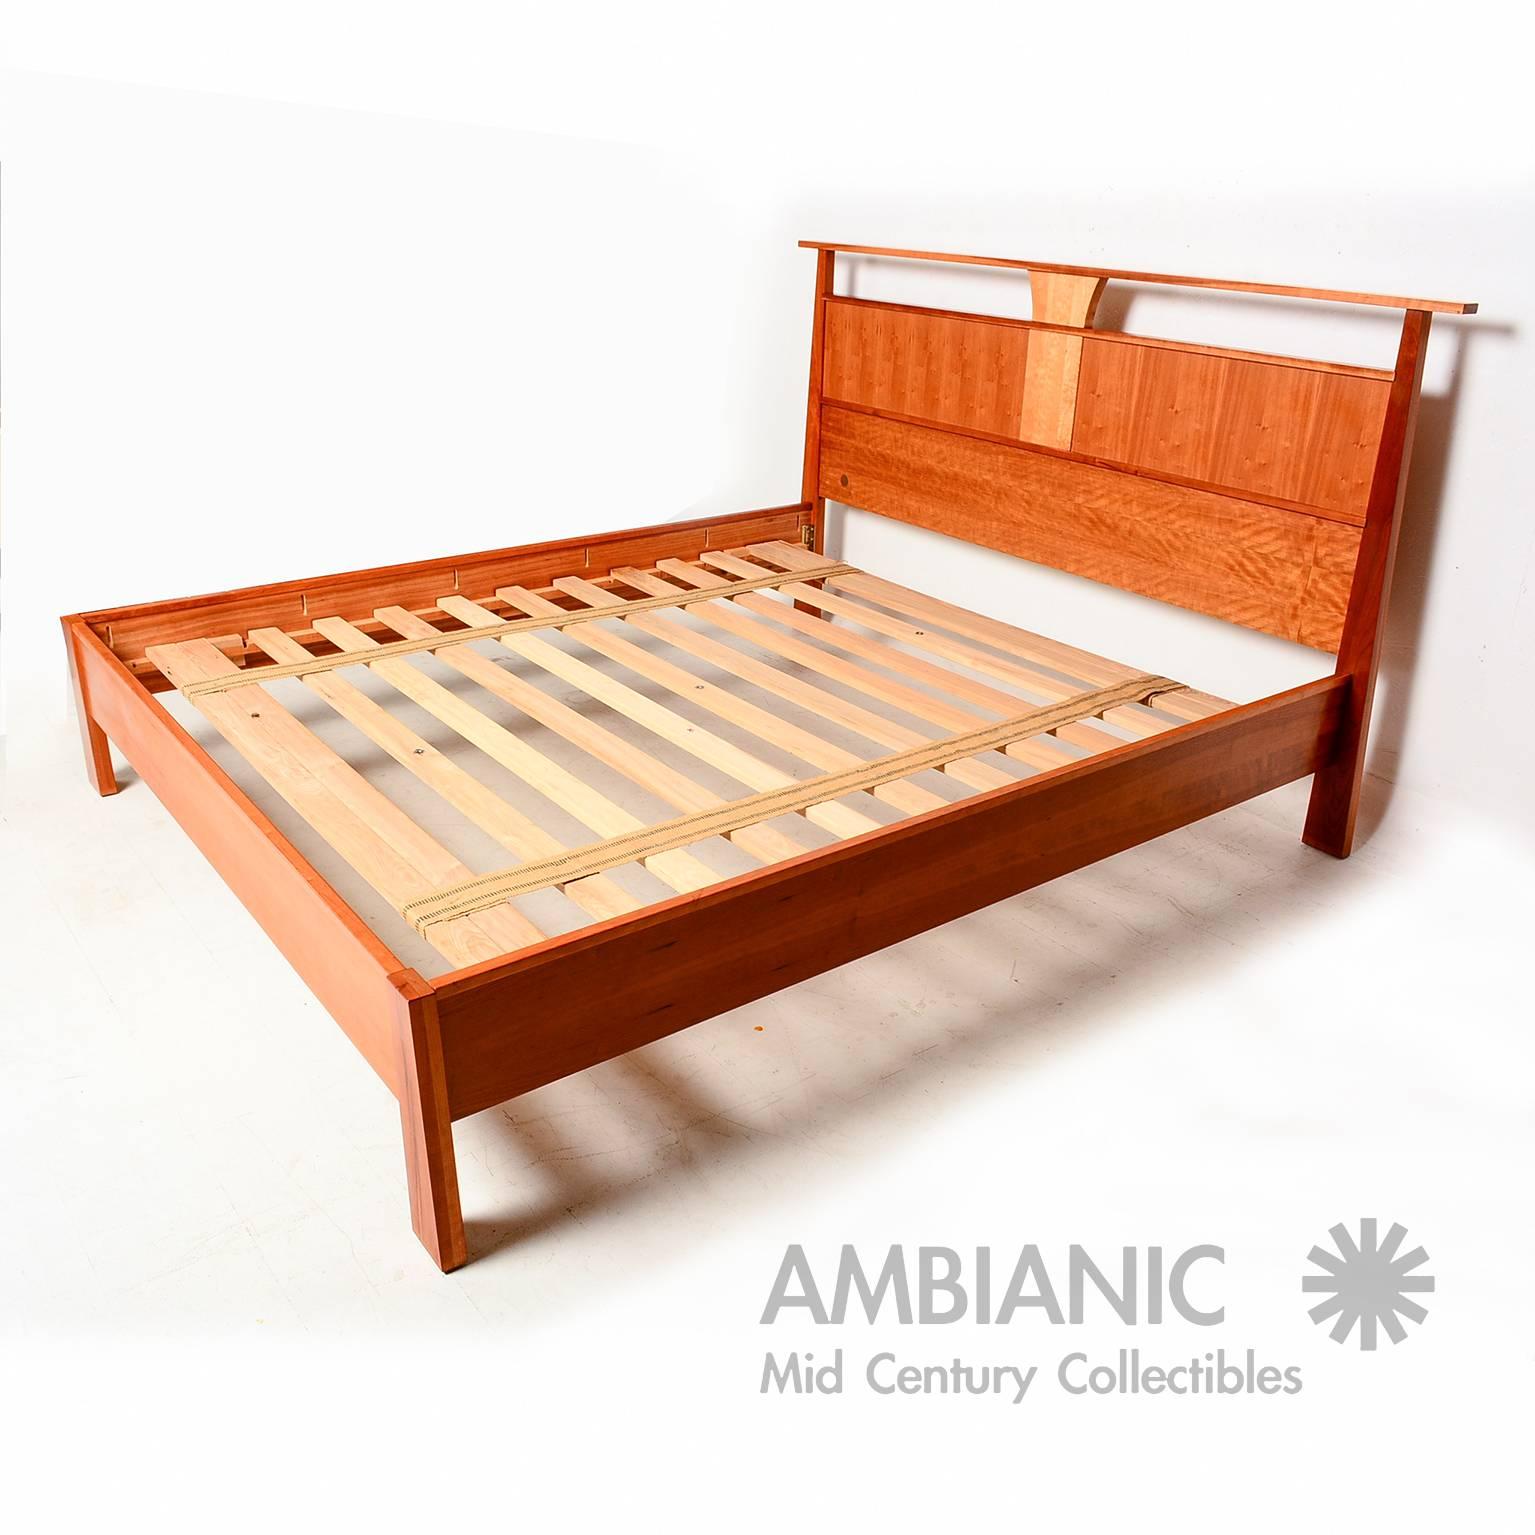 For your consideration a beautiful cal king bed produced by Wood Castle in Oregon.

Solid cherry and maple wood with fine details of construction. 
Please notice the tapered legs with clean modern lines. 

Will fit a Cal King mattress 72